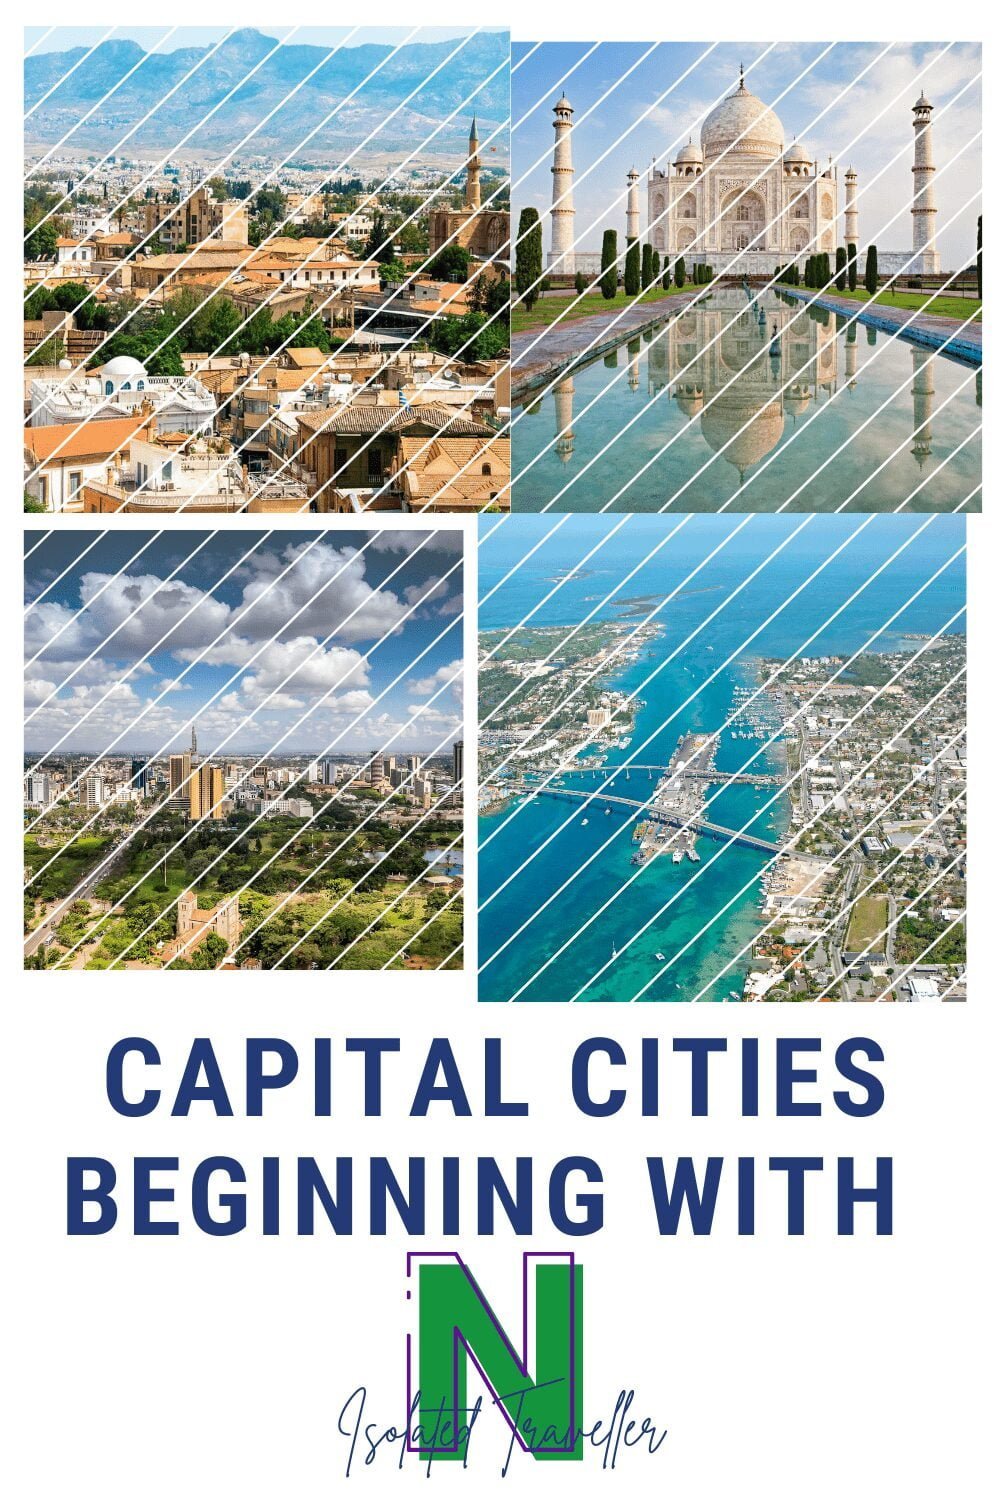 Capital Cities beginning with N